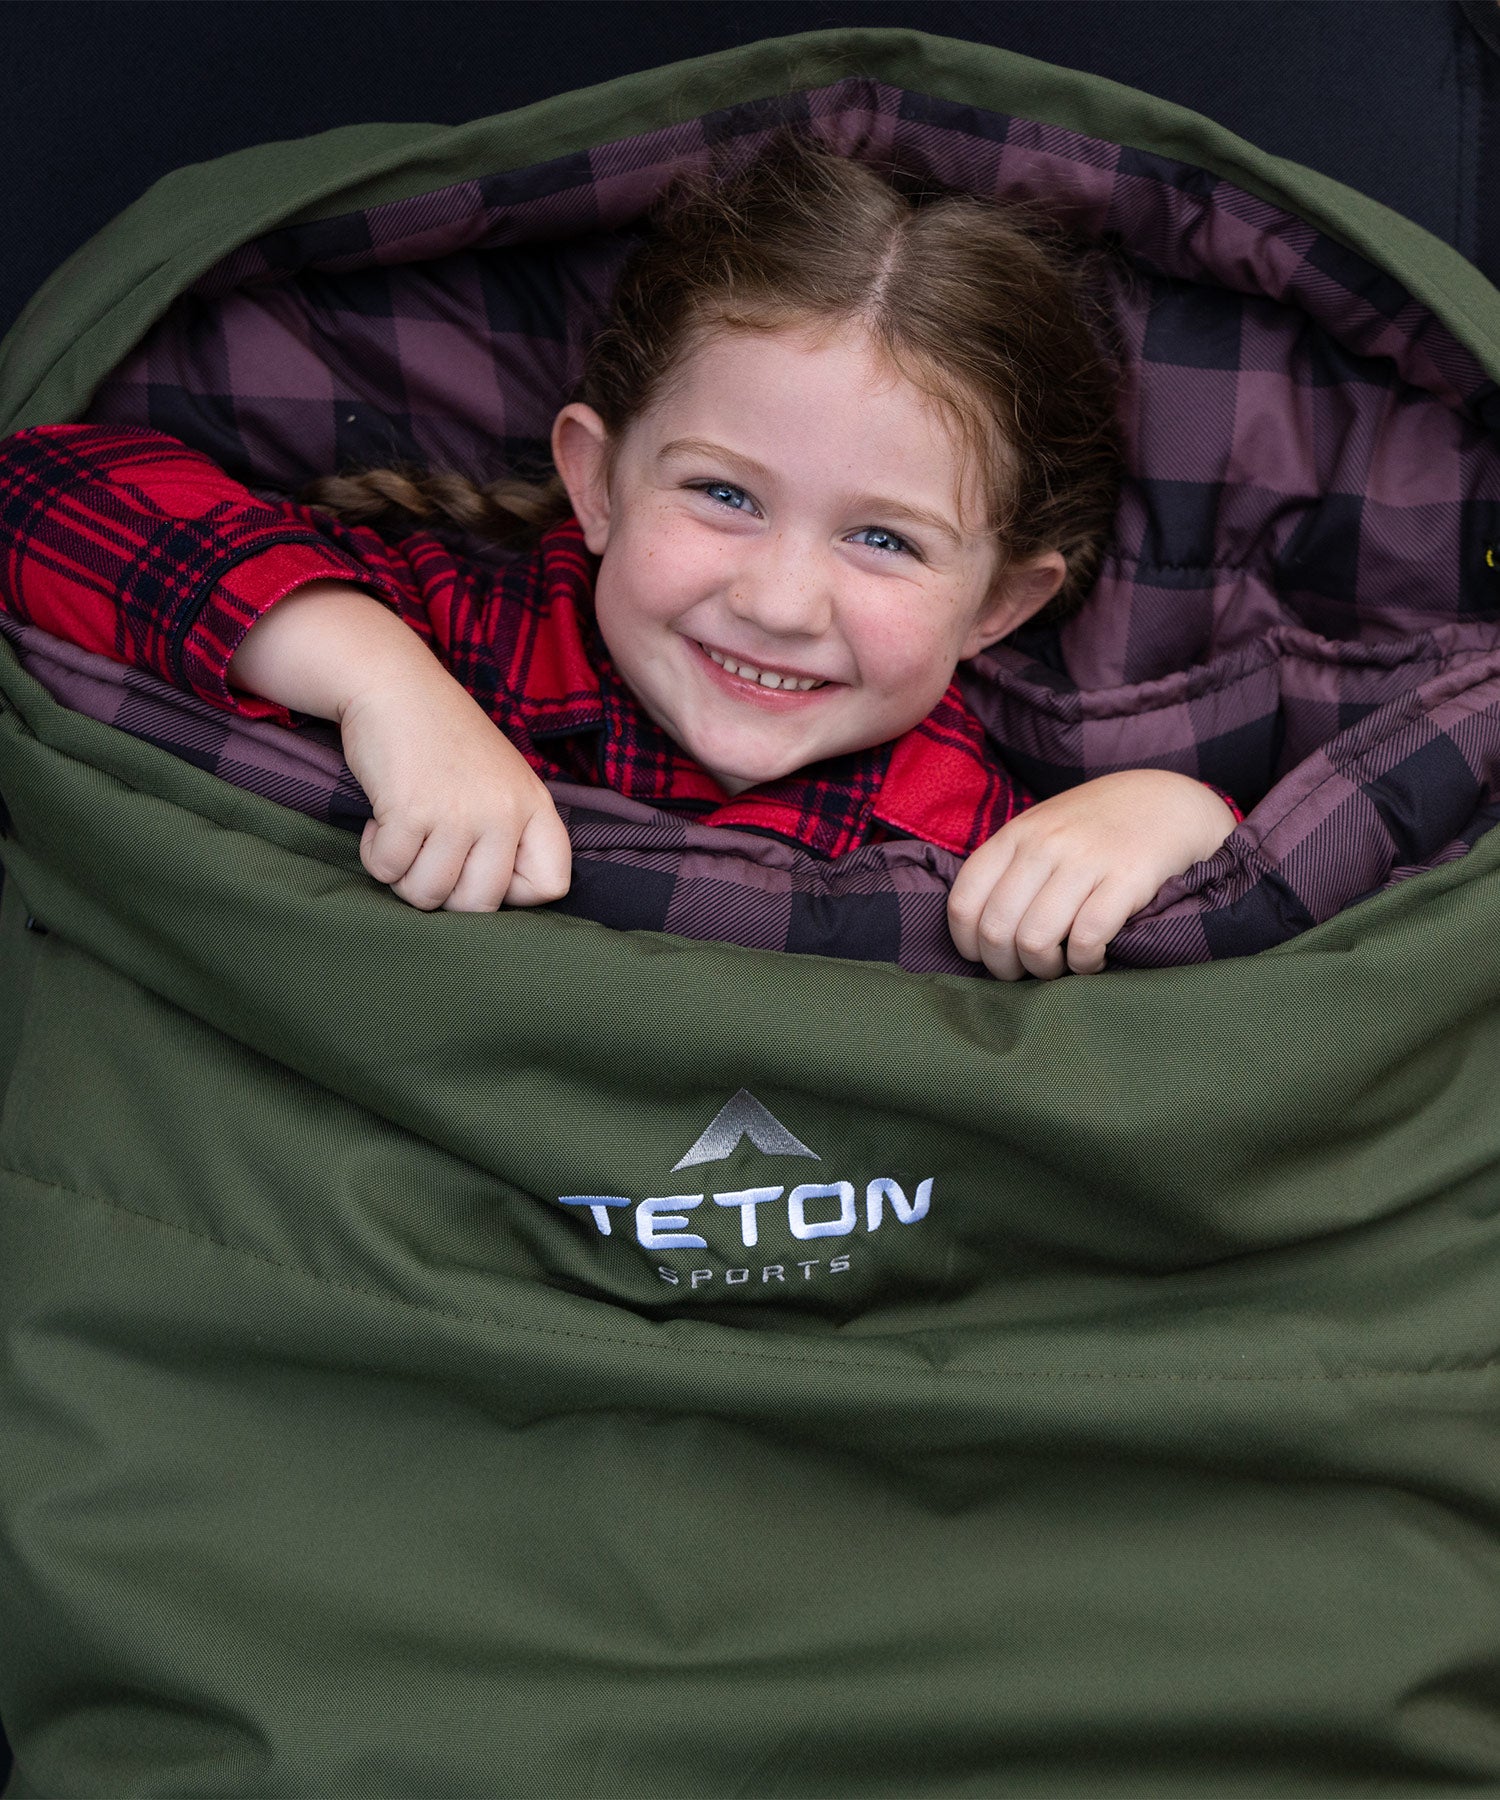 Image shows a young girl smiling while snuggled in a green TETON Sports Bridger Canvas Sleeping Bag.